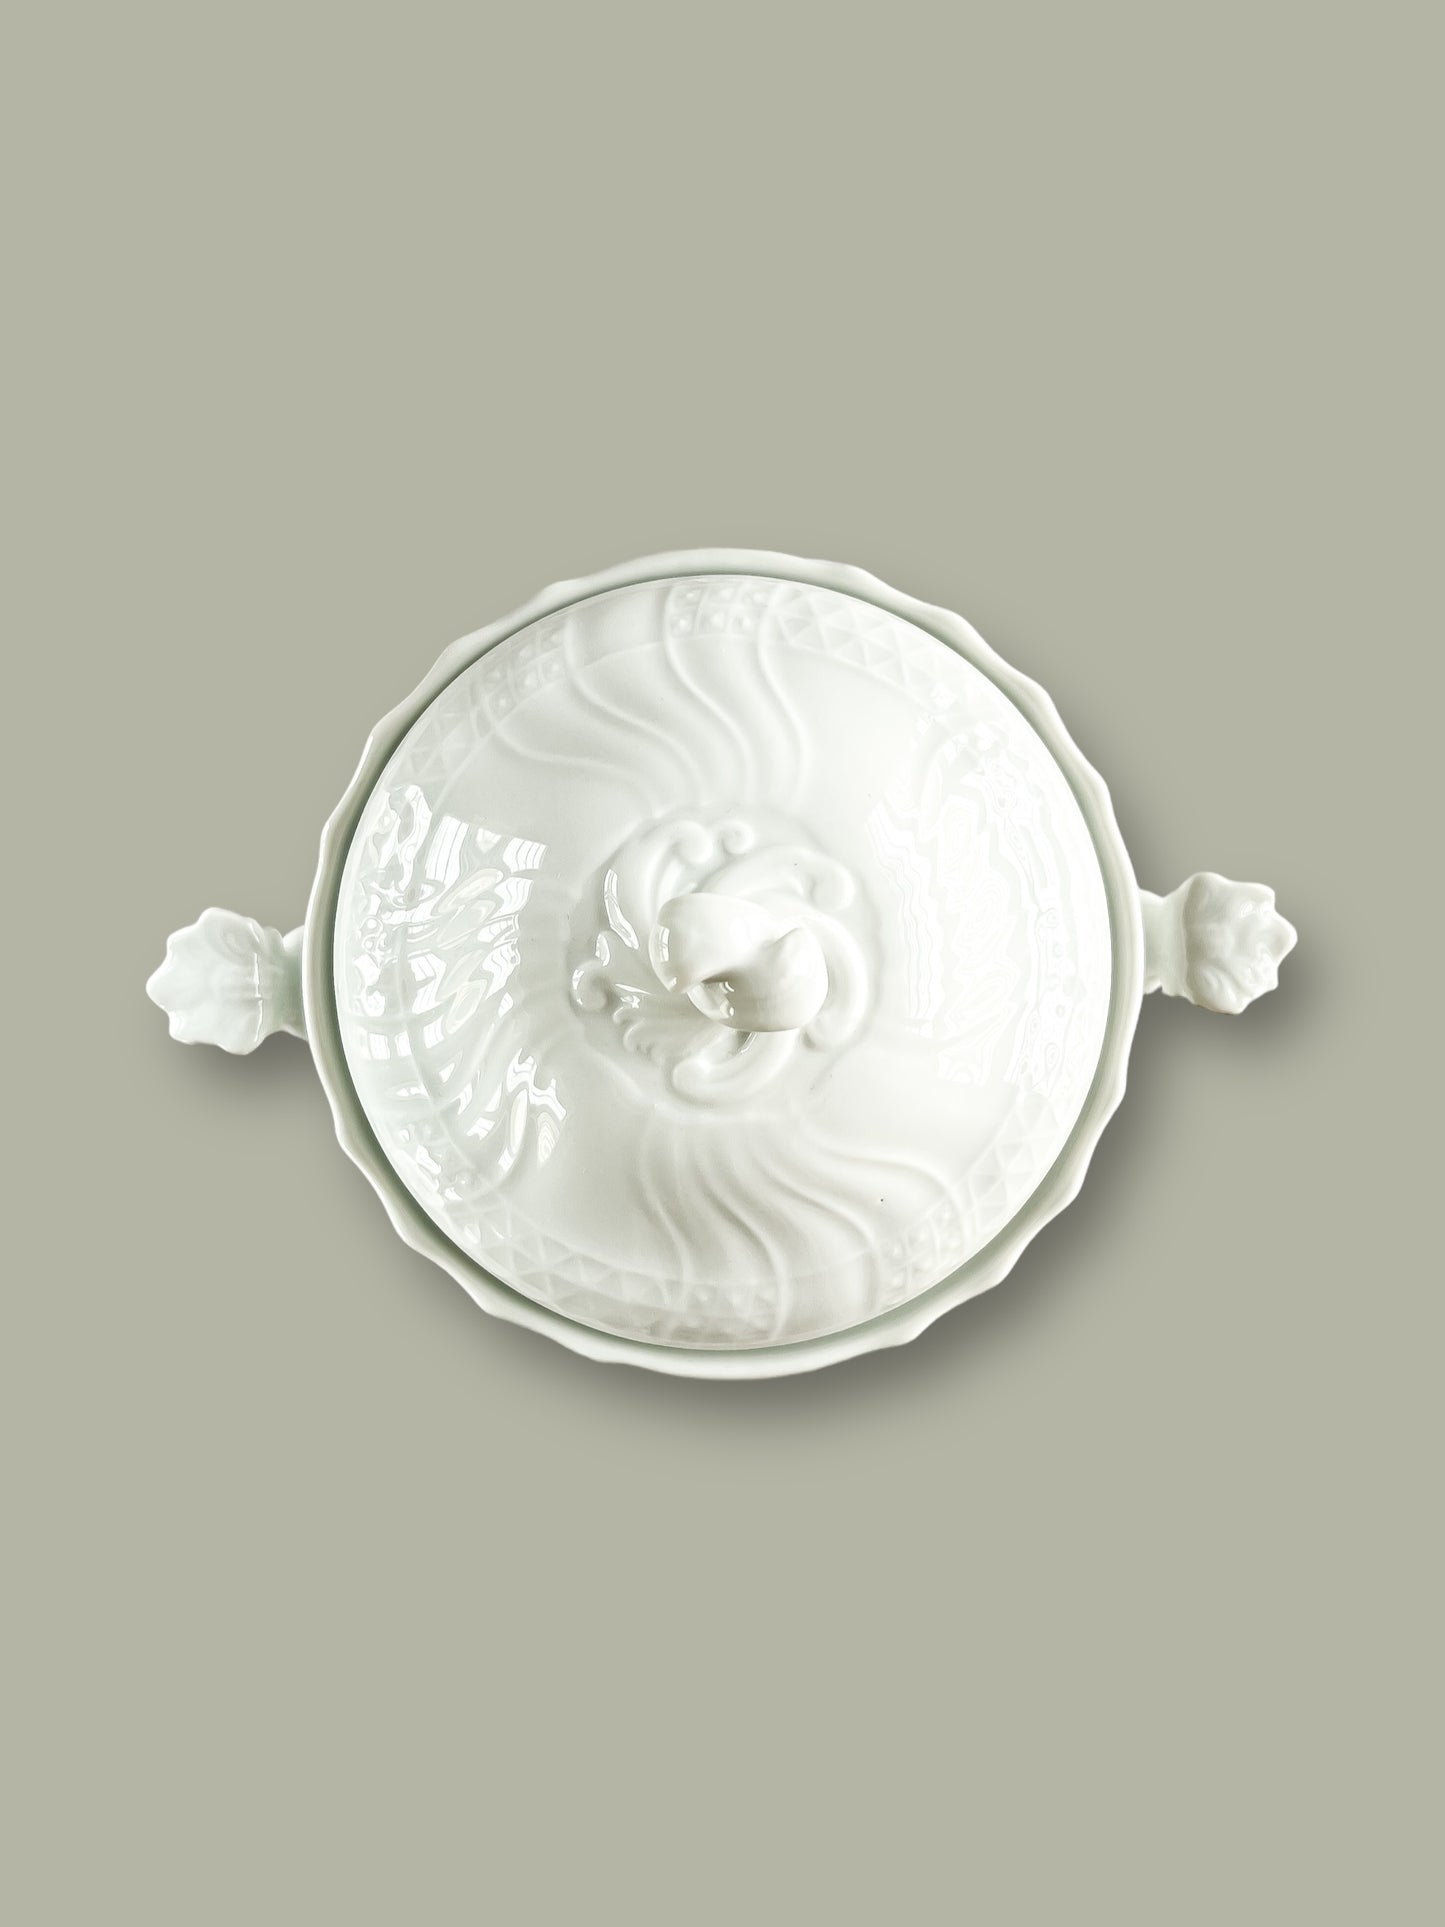 Hutschenreuther Small Round Covered Vegetable Tureen - ‘Dresden’ Collection in All White